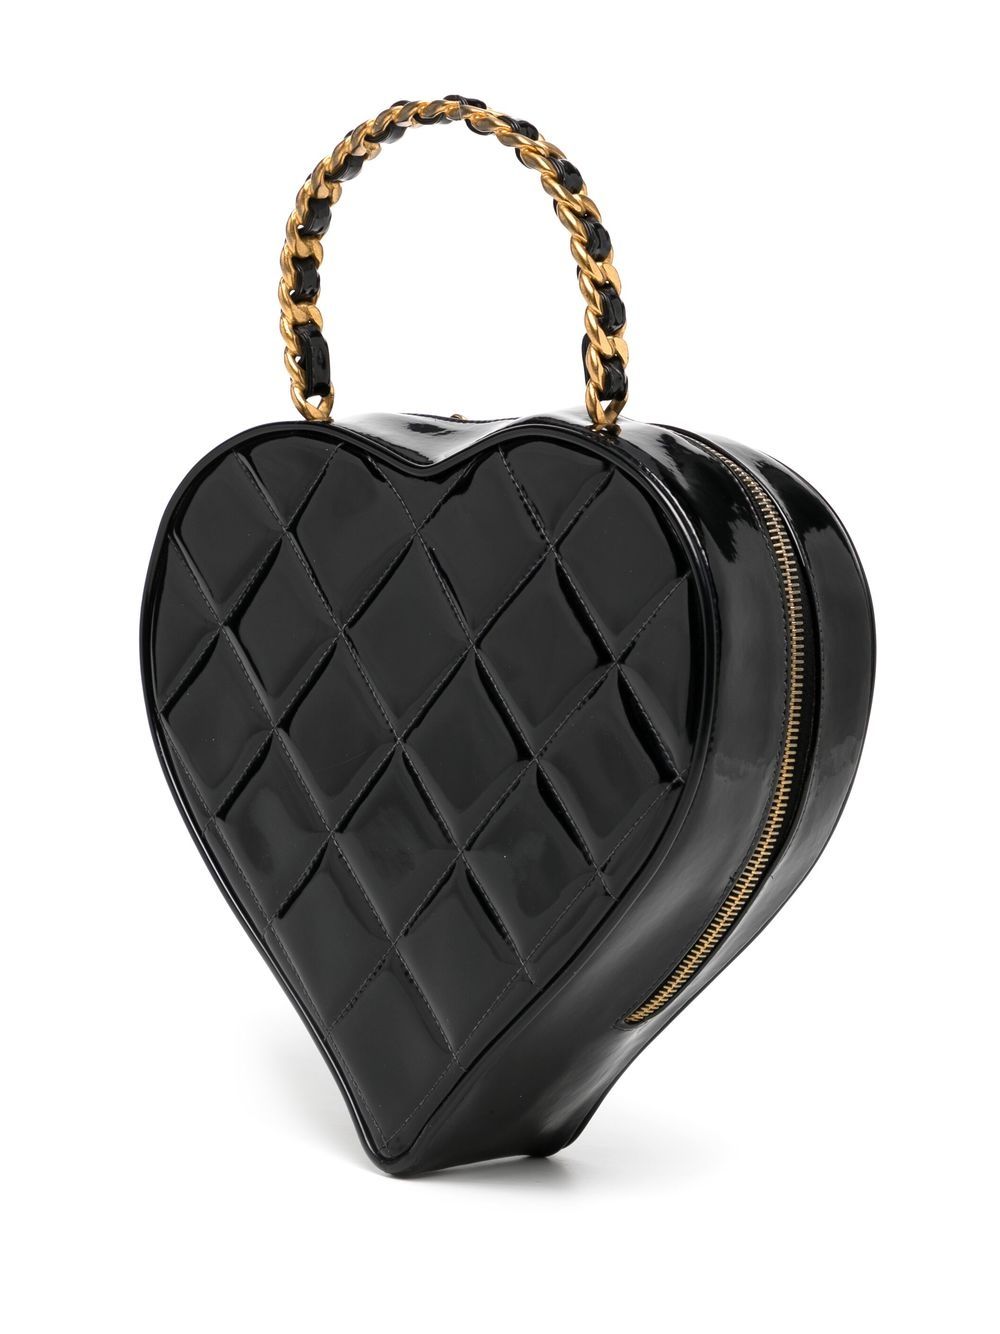 CHANEL Pre-Owned 1995 diamond-quilted CC heart-shaped Handbag - Farfetch